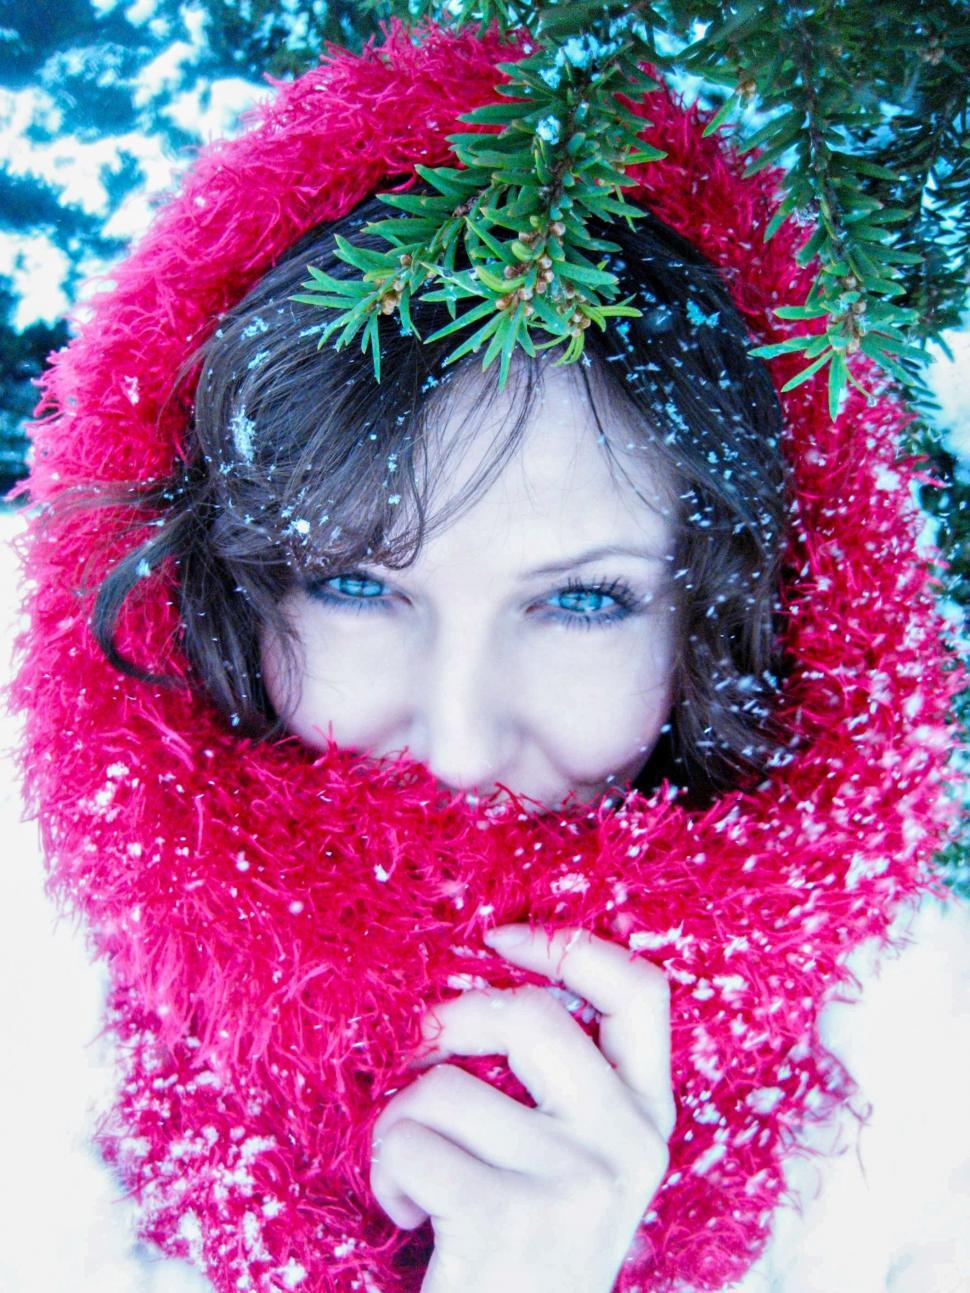 Free Image of Woman With Mistletoe leaves and Snowfall - looking at camera  